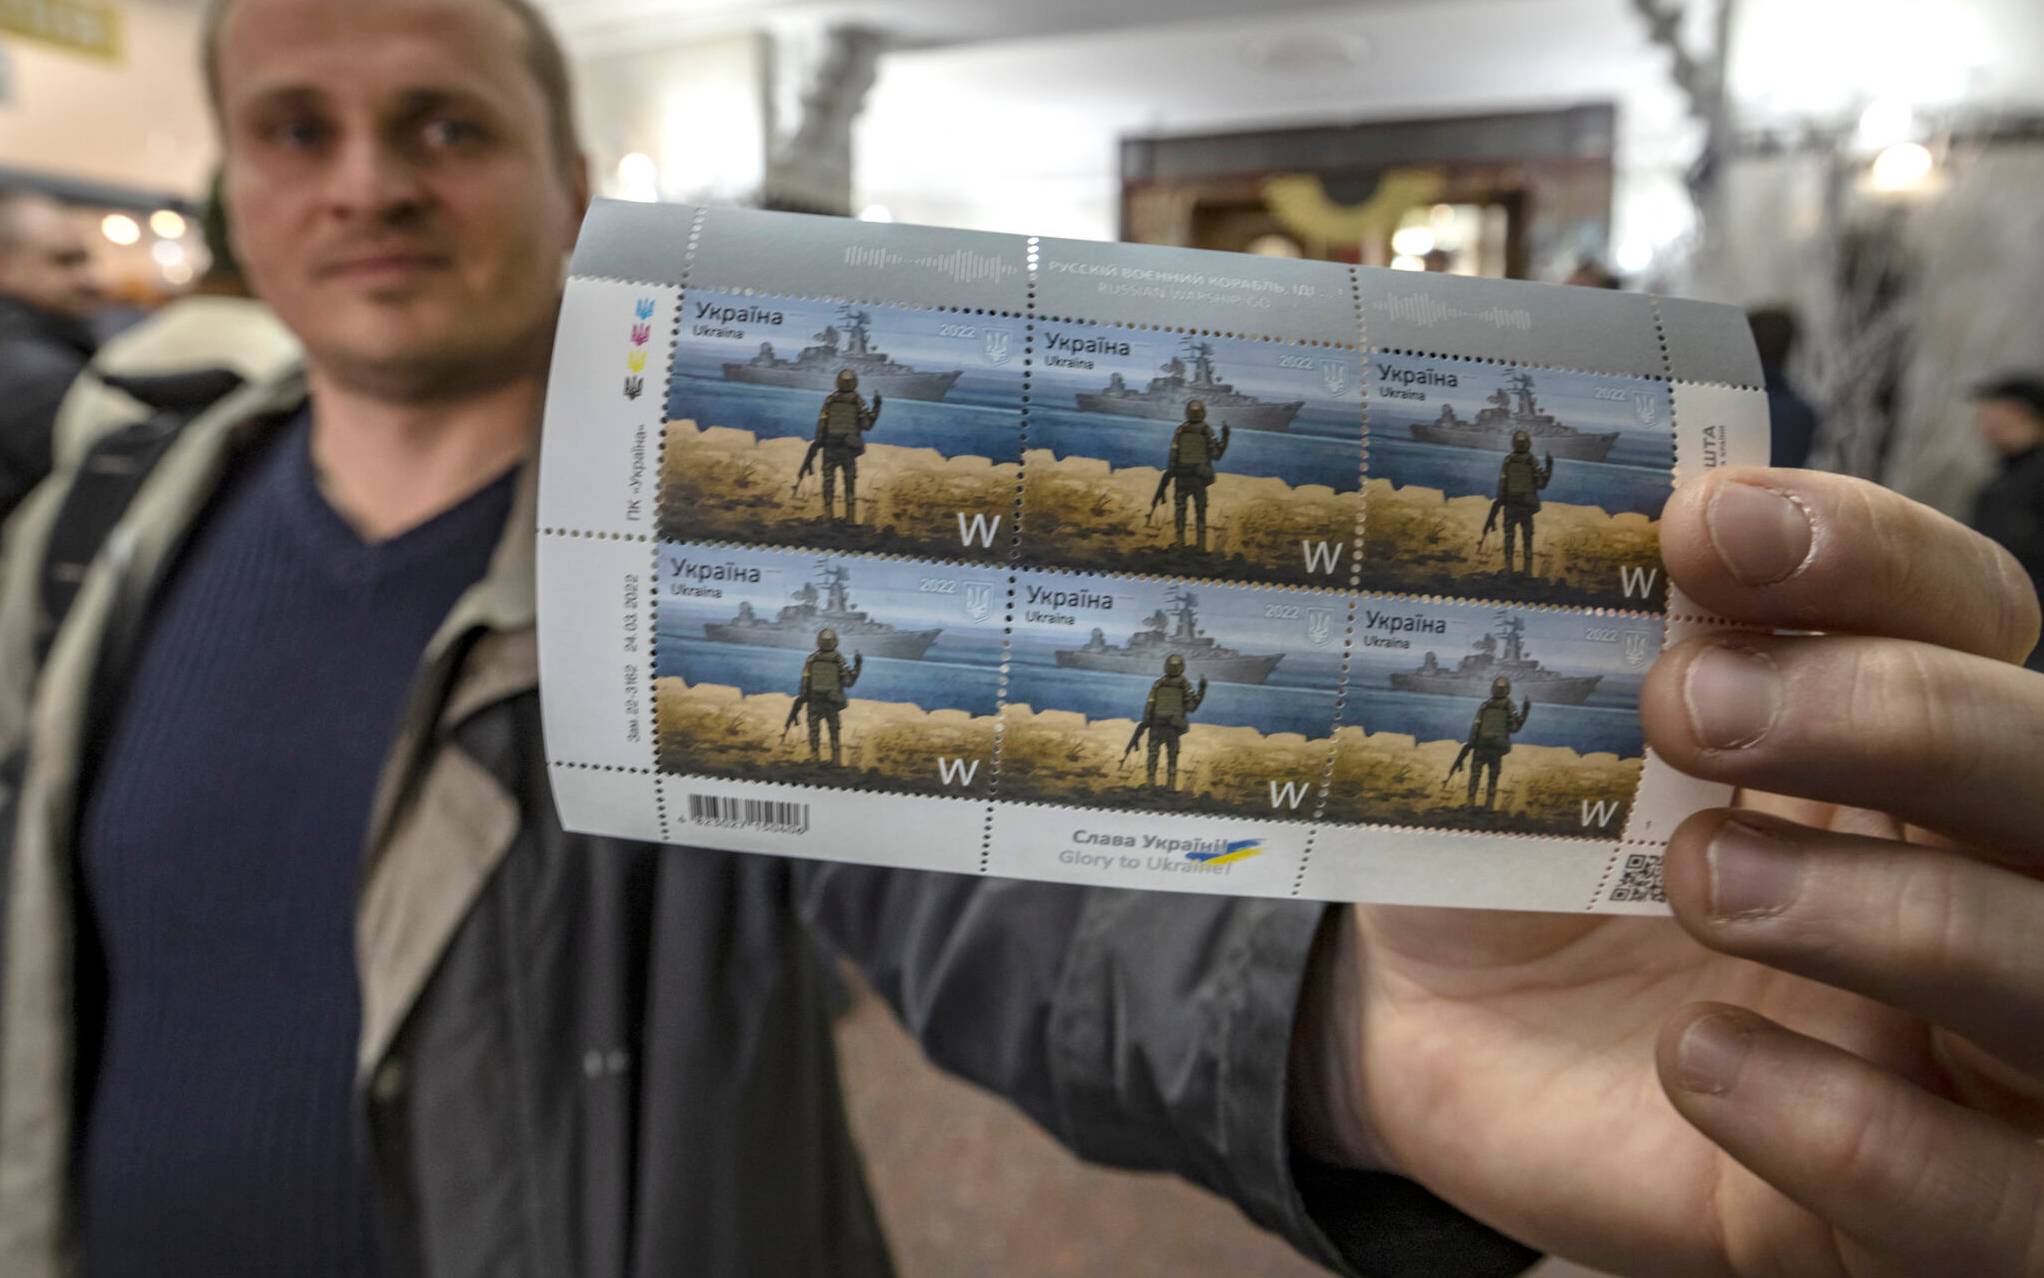 A local resident shows new Ukrainian stamps titled "Russian warship, Go...!" at a post office in the center of Kyiv on April 15, 2022. (Photo by FADEL SENNA / AFP)